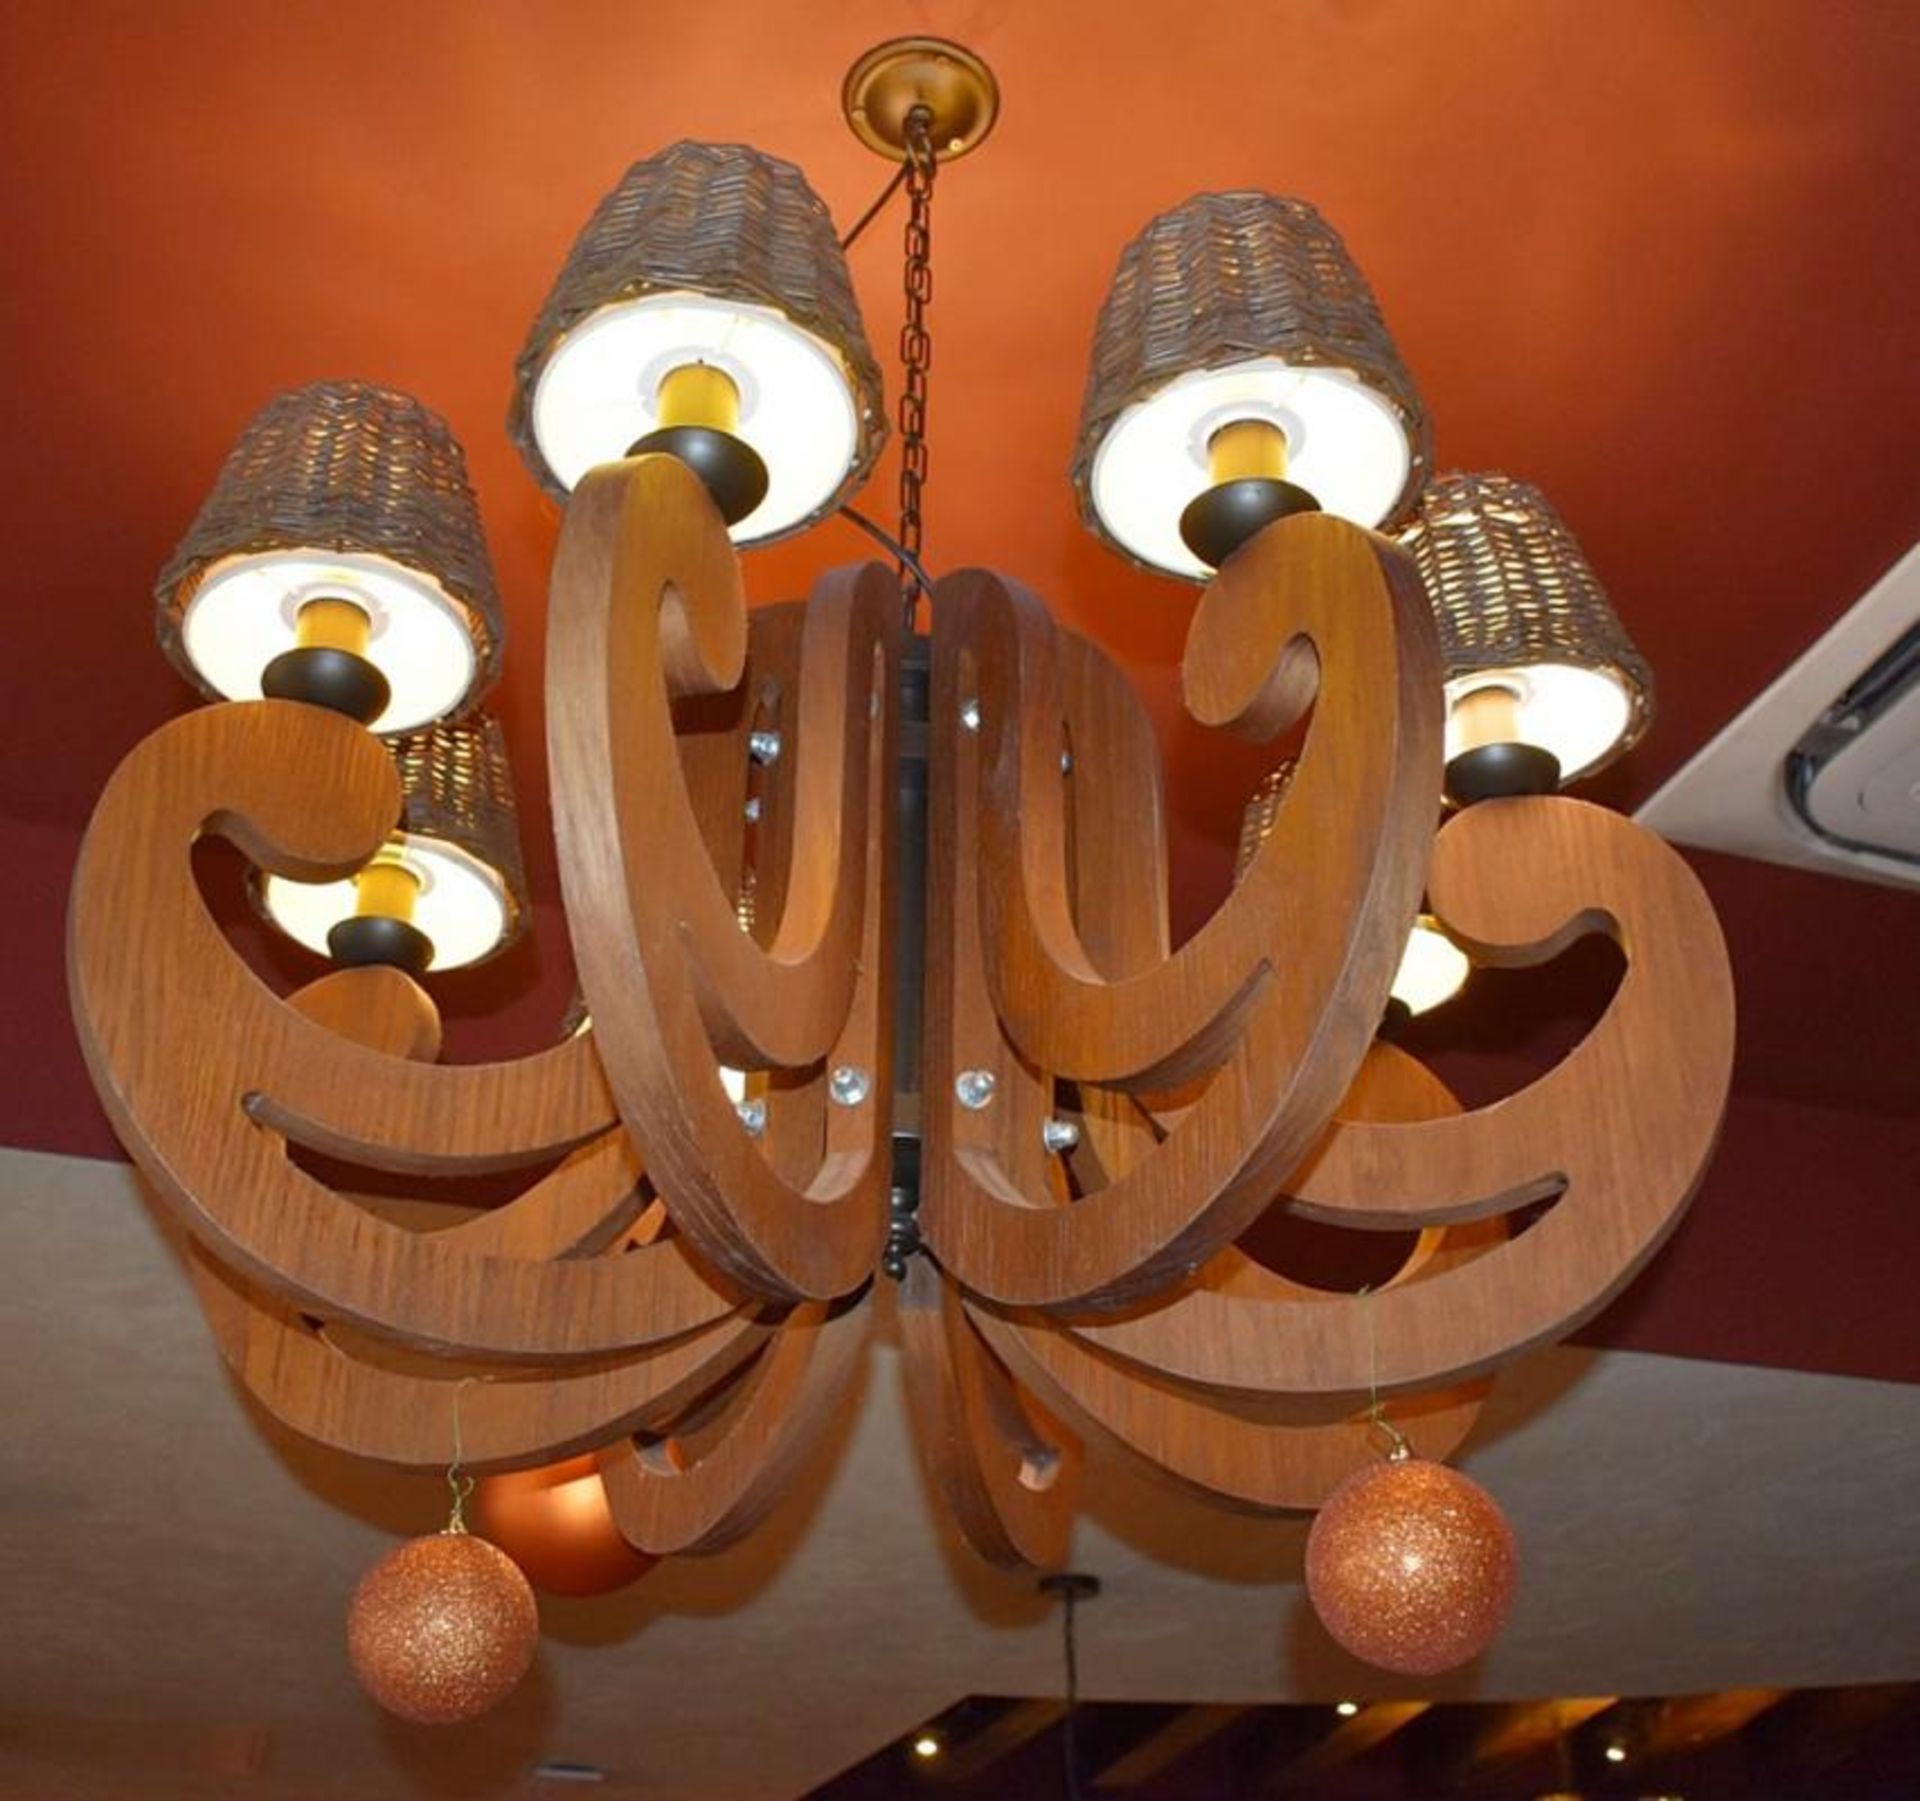 2 x Large Artisan Wooden Candelabra 8 Light Chandeliers - Approx Dimensions: Diameter 90cm - From - Image 2 of 6